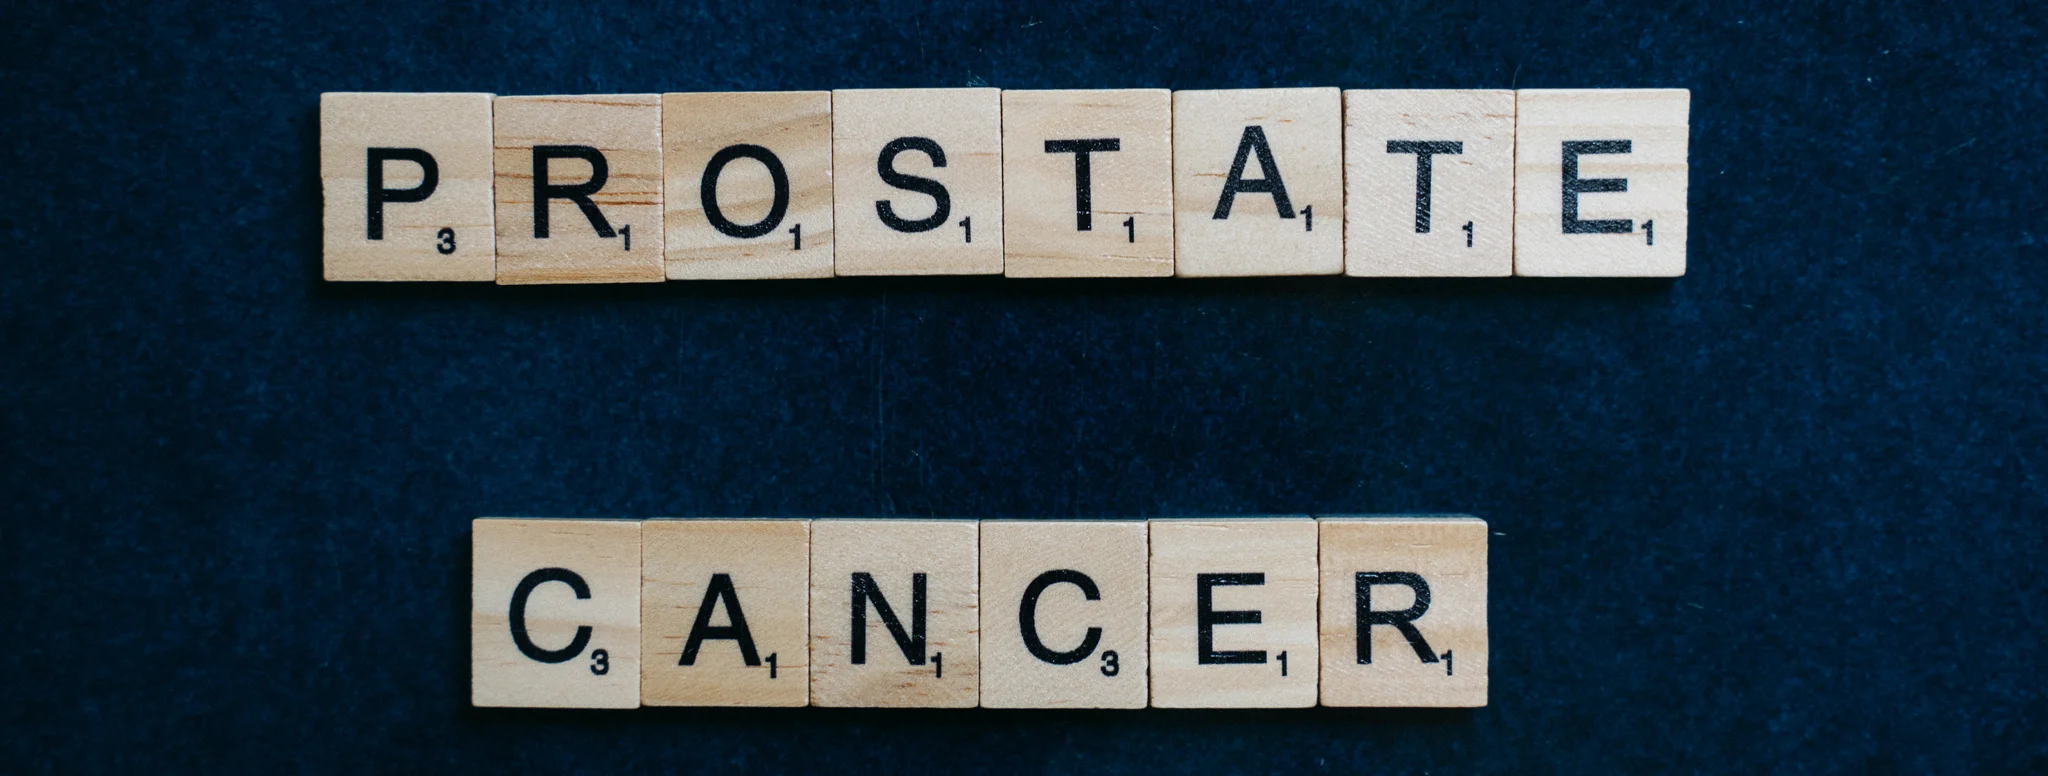 Prostate Cancer Prevalence, Treatment and Effects